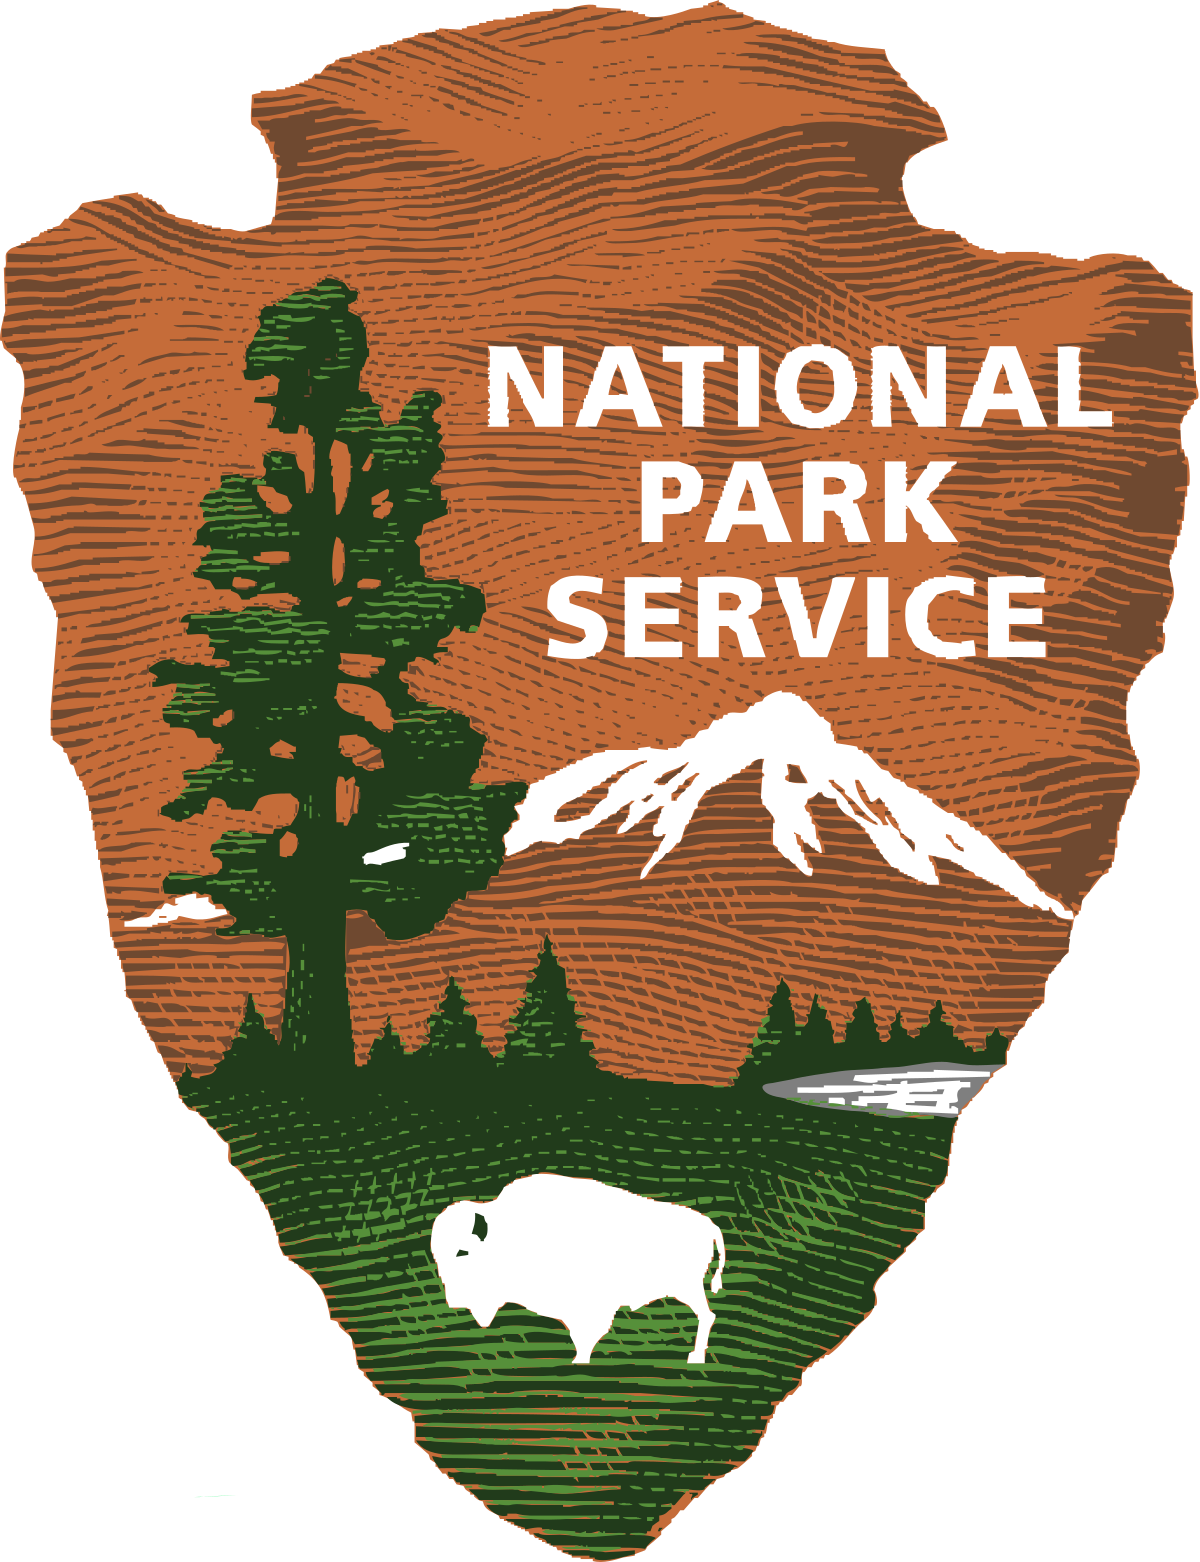 National Park Service logo with link to web site